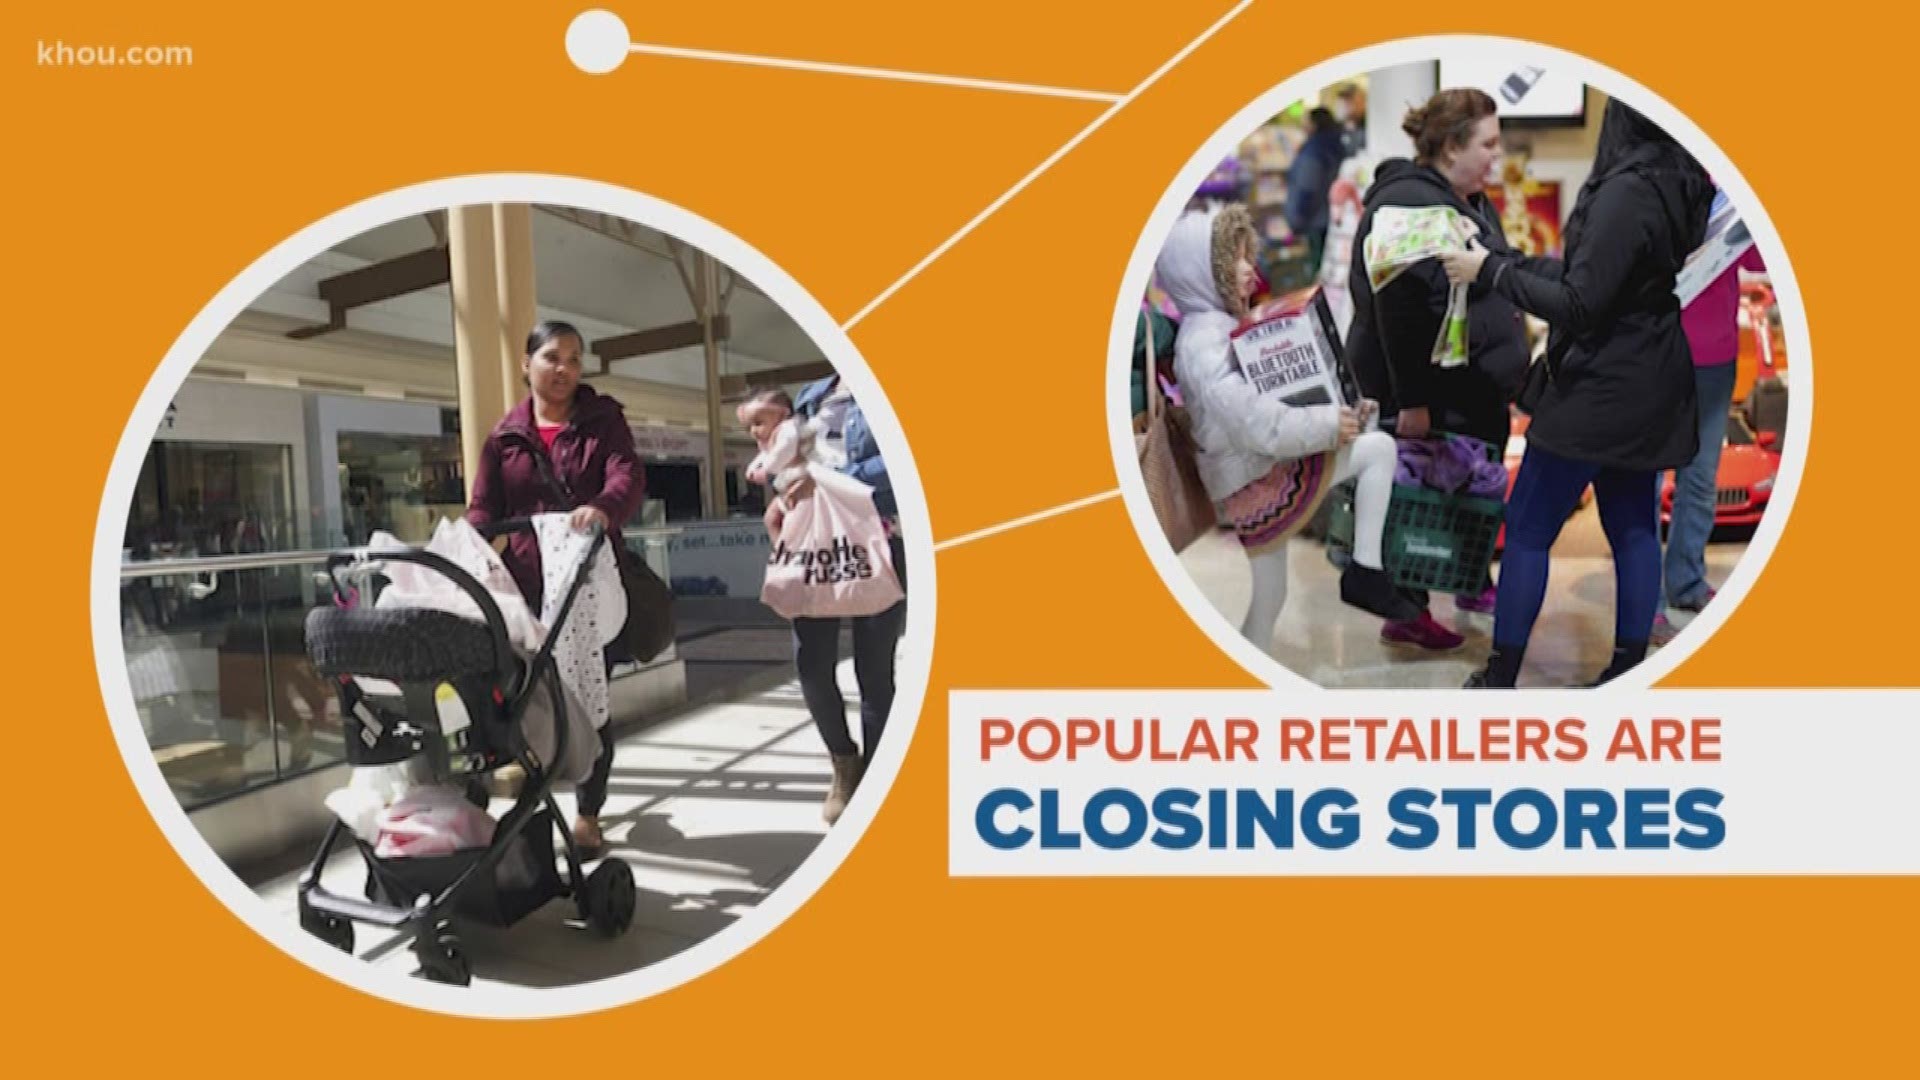 Several popular retail chains have closed their doors in the last few years. But even stores pulling in big profits are cutting back. Our Janelle Bludau connects the dots.